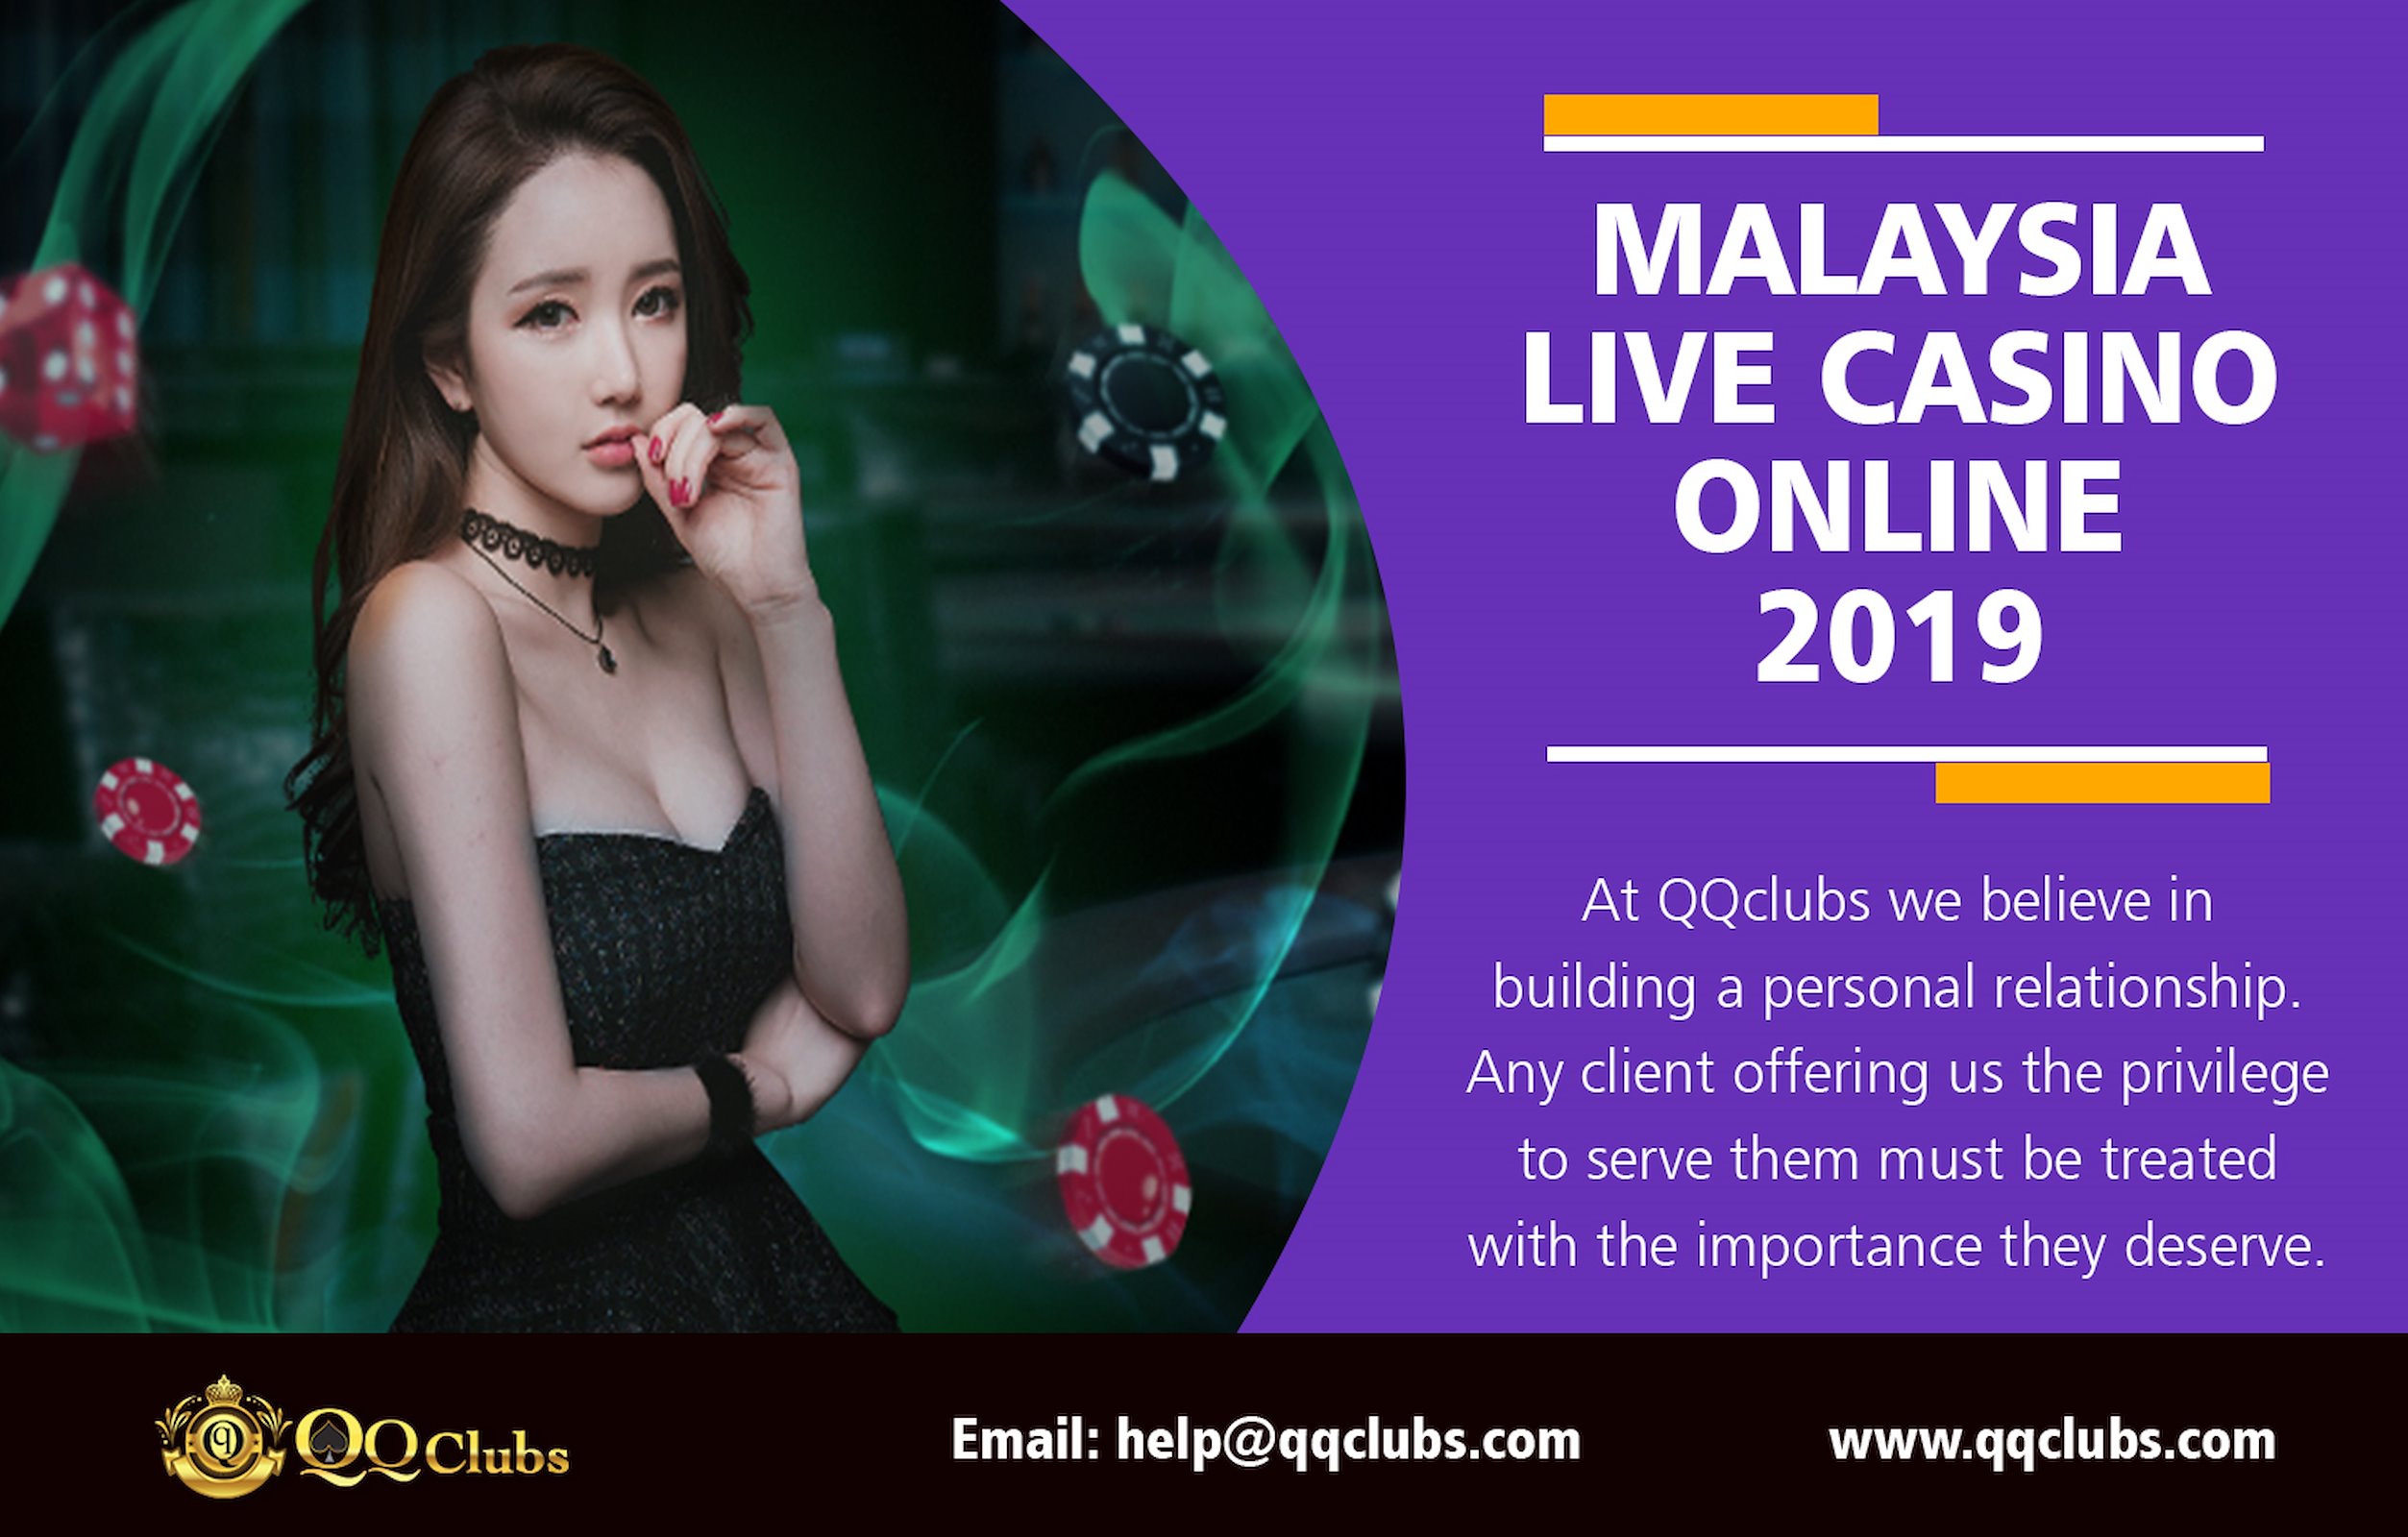 trusted online casino malaysia 2019 topic